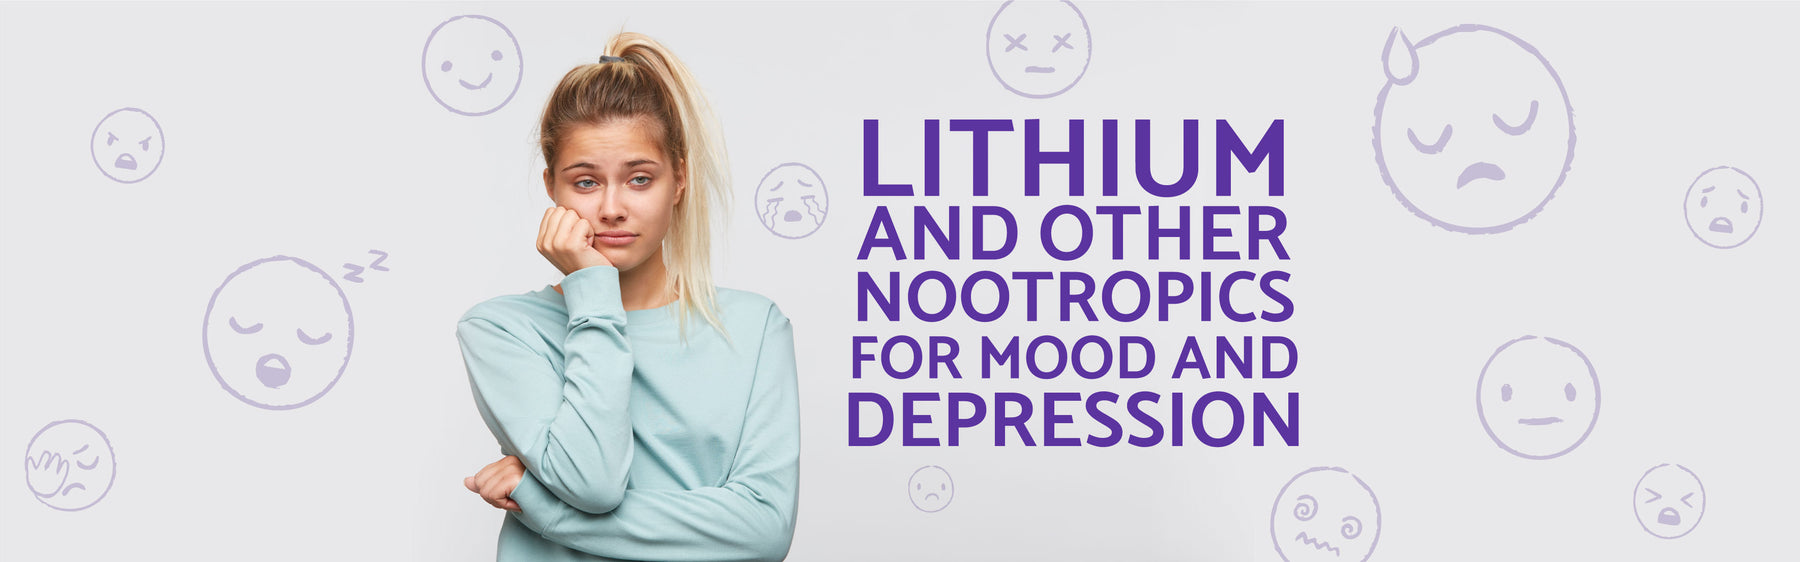 Lithium & Other Nootropics for Mood & Depression | Article | OPTMZ | 